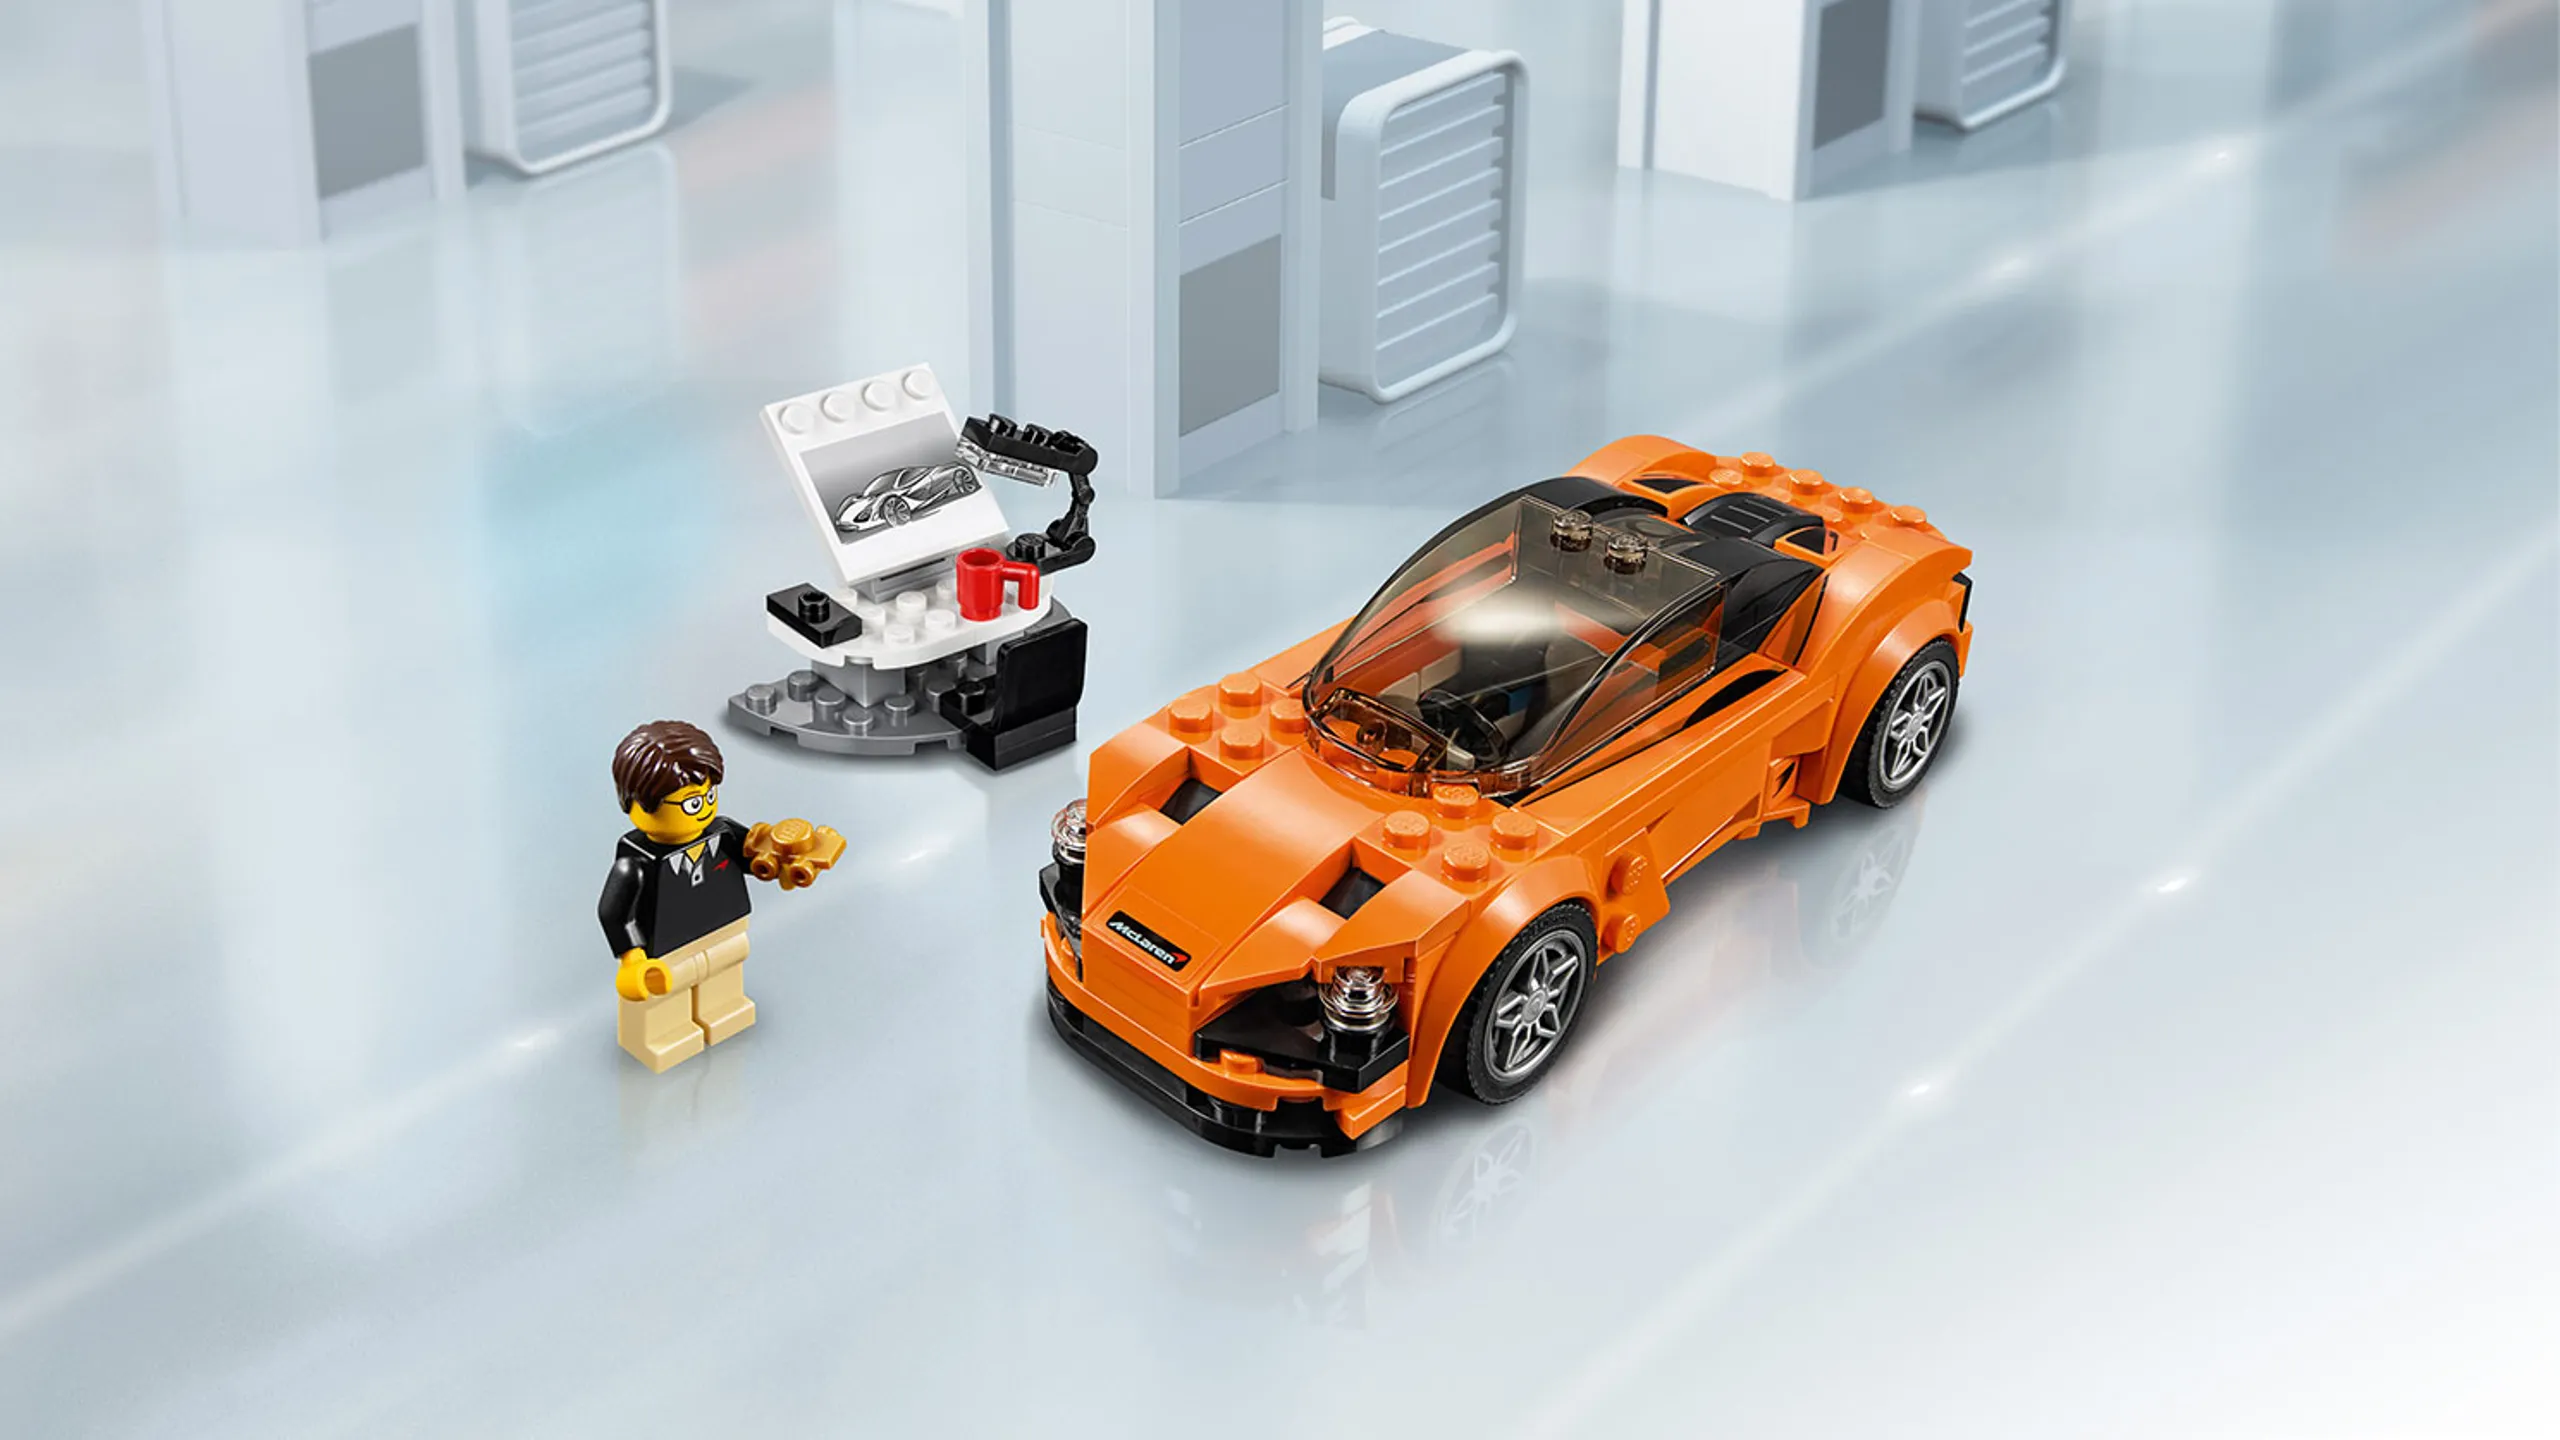 LEGO Speed Champions - 75880 McLaren - Show off your design skills and build this awesome LEGO® Speed Champions model.